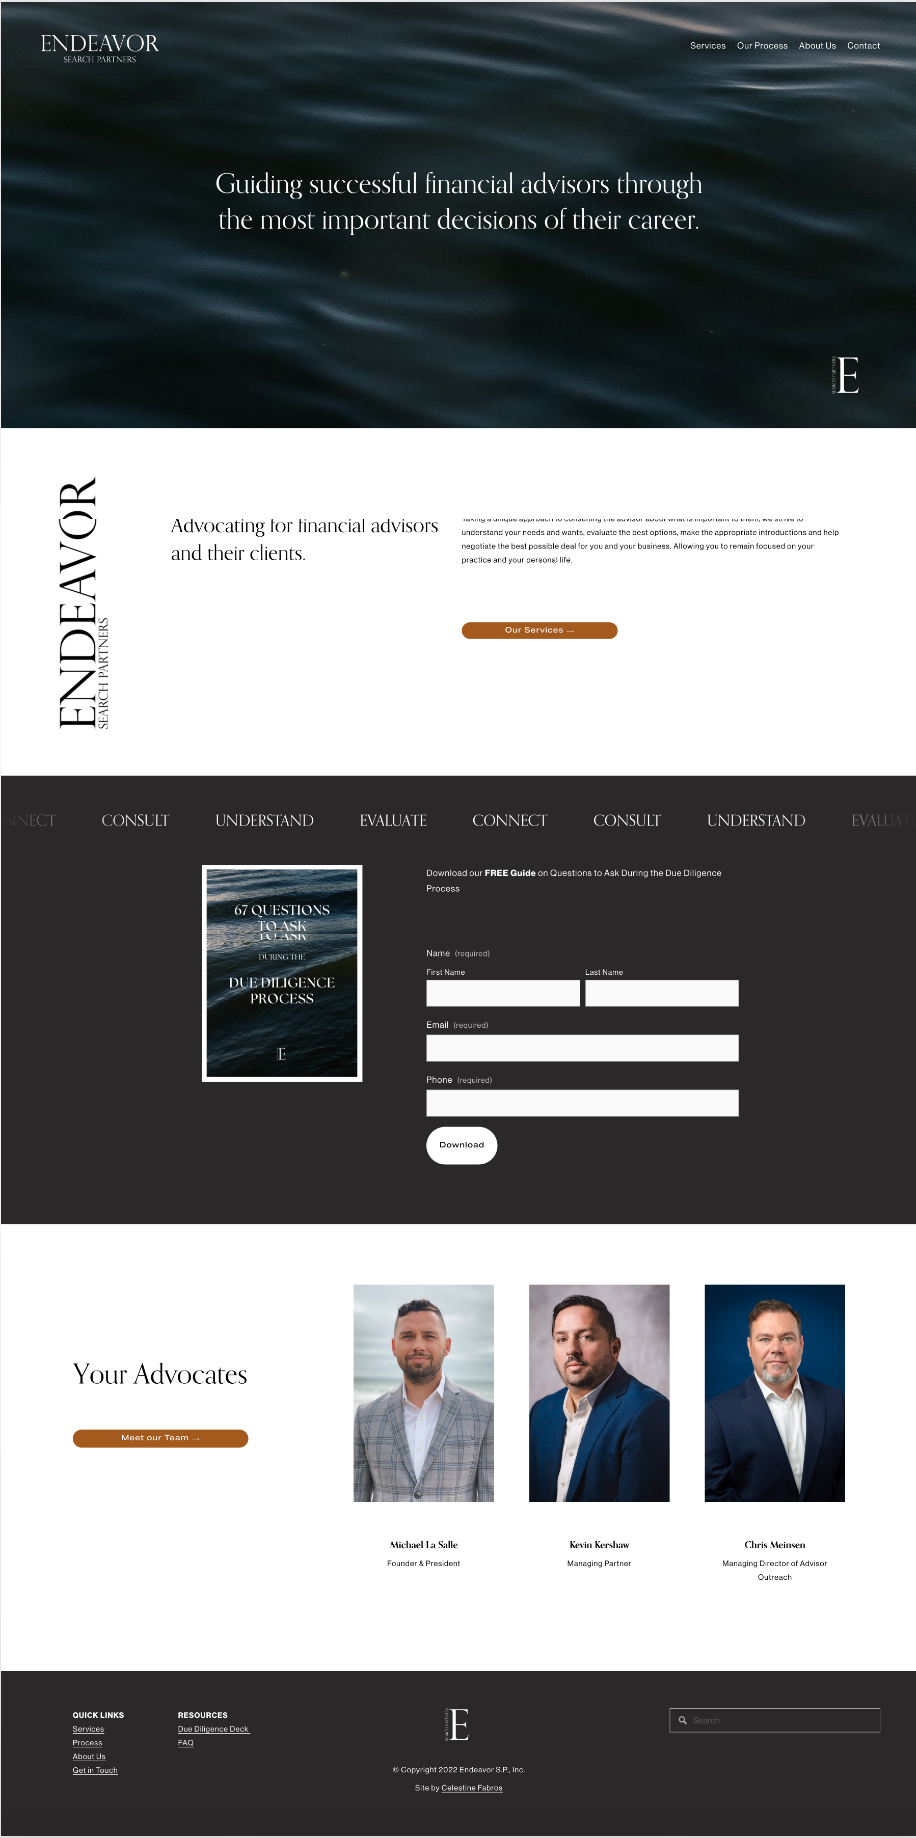 endeavor-search-partners-homepage-design-celestine-fabros.png